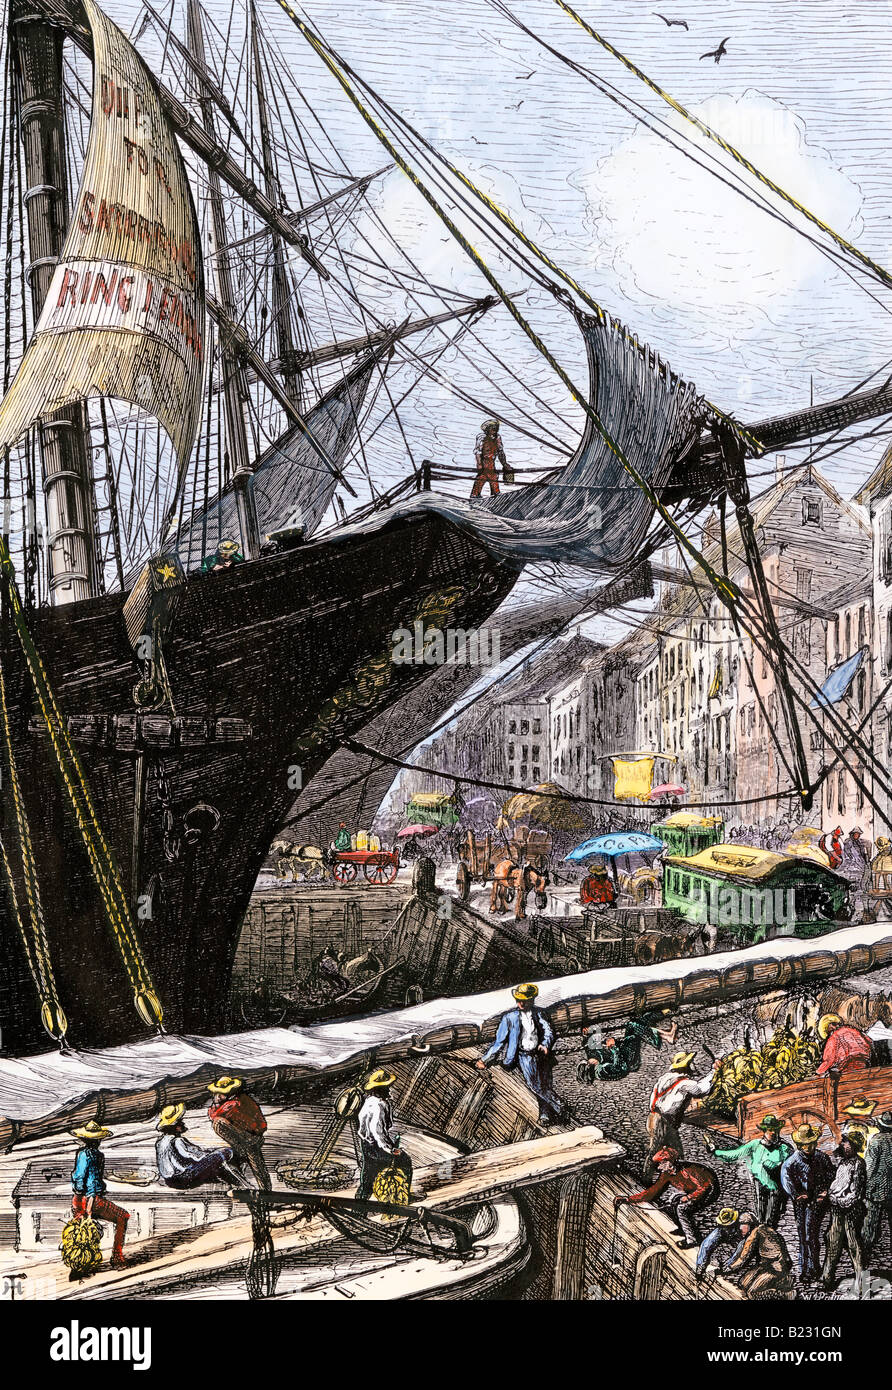 Unloading bananas from a cargo ship New York City 1870. Hand-colored woodcut Stock Photo